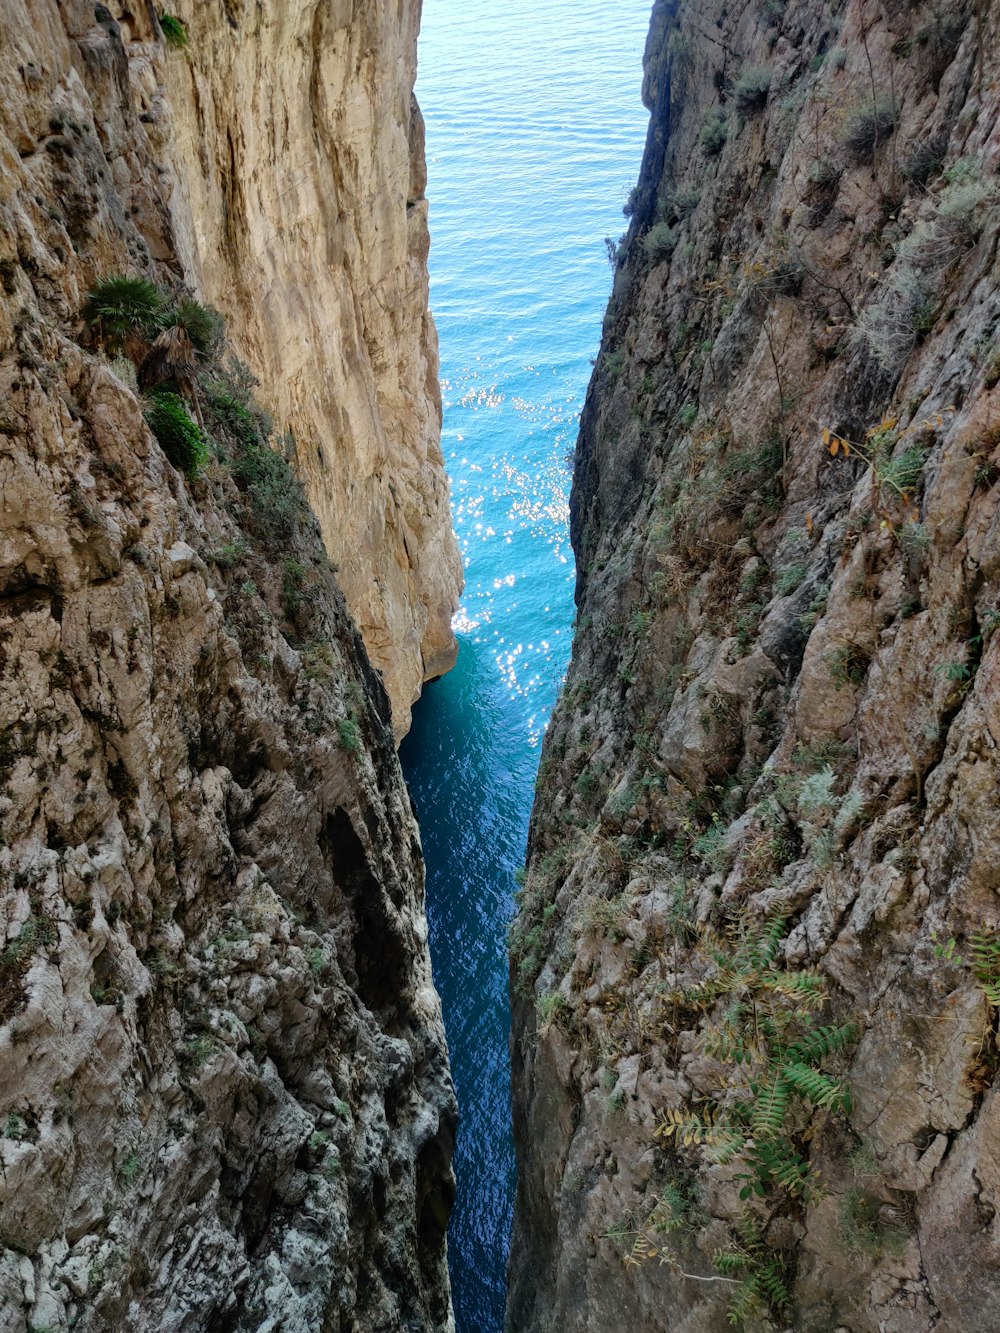 a view of the ocean from a high cliff